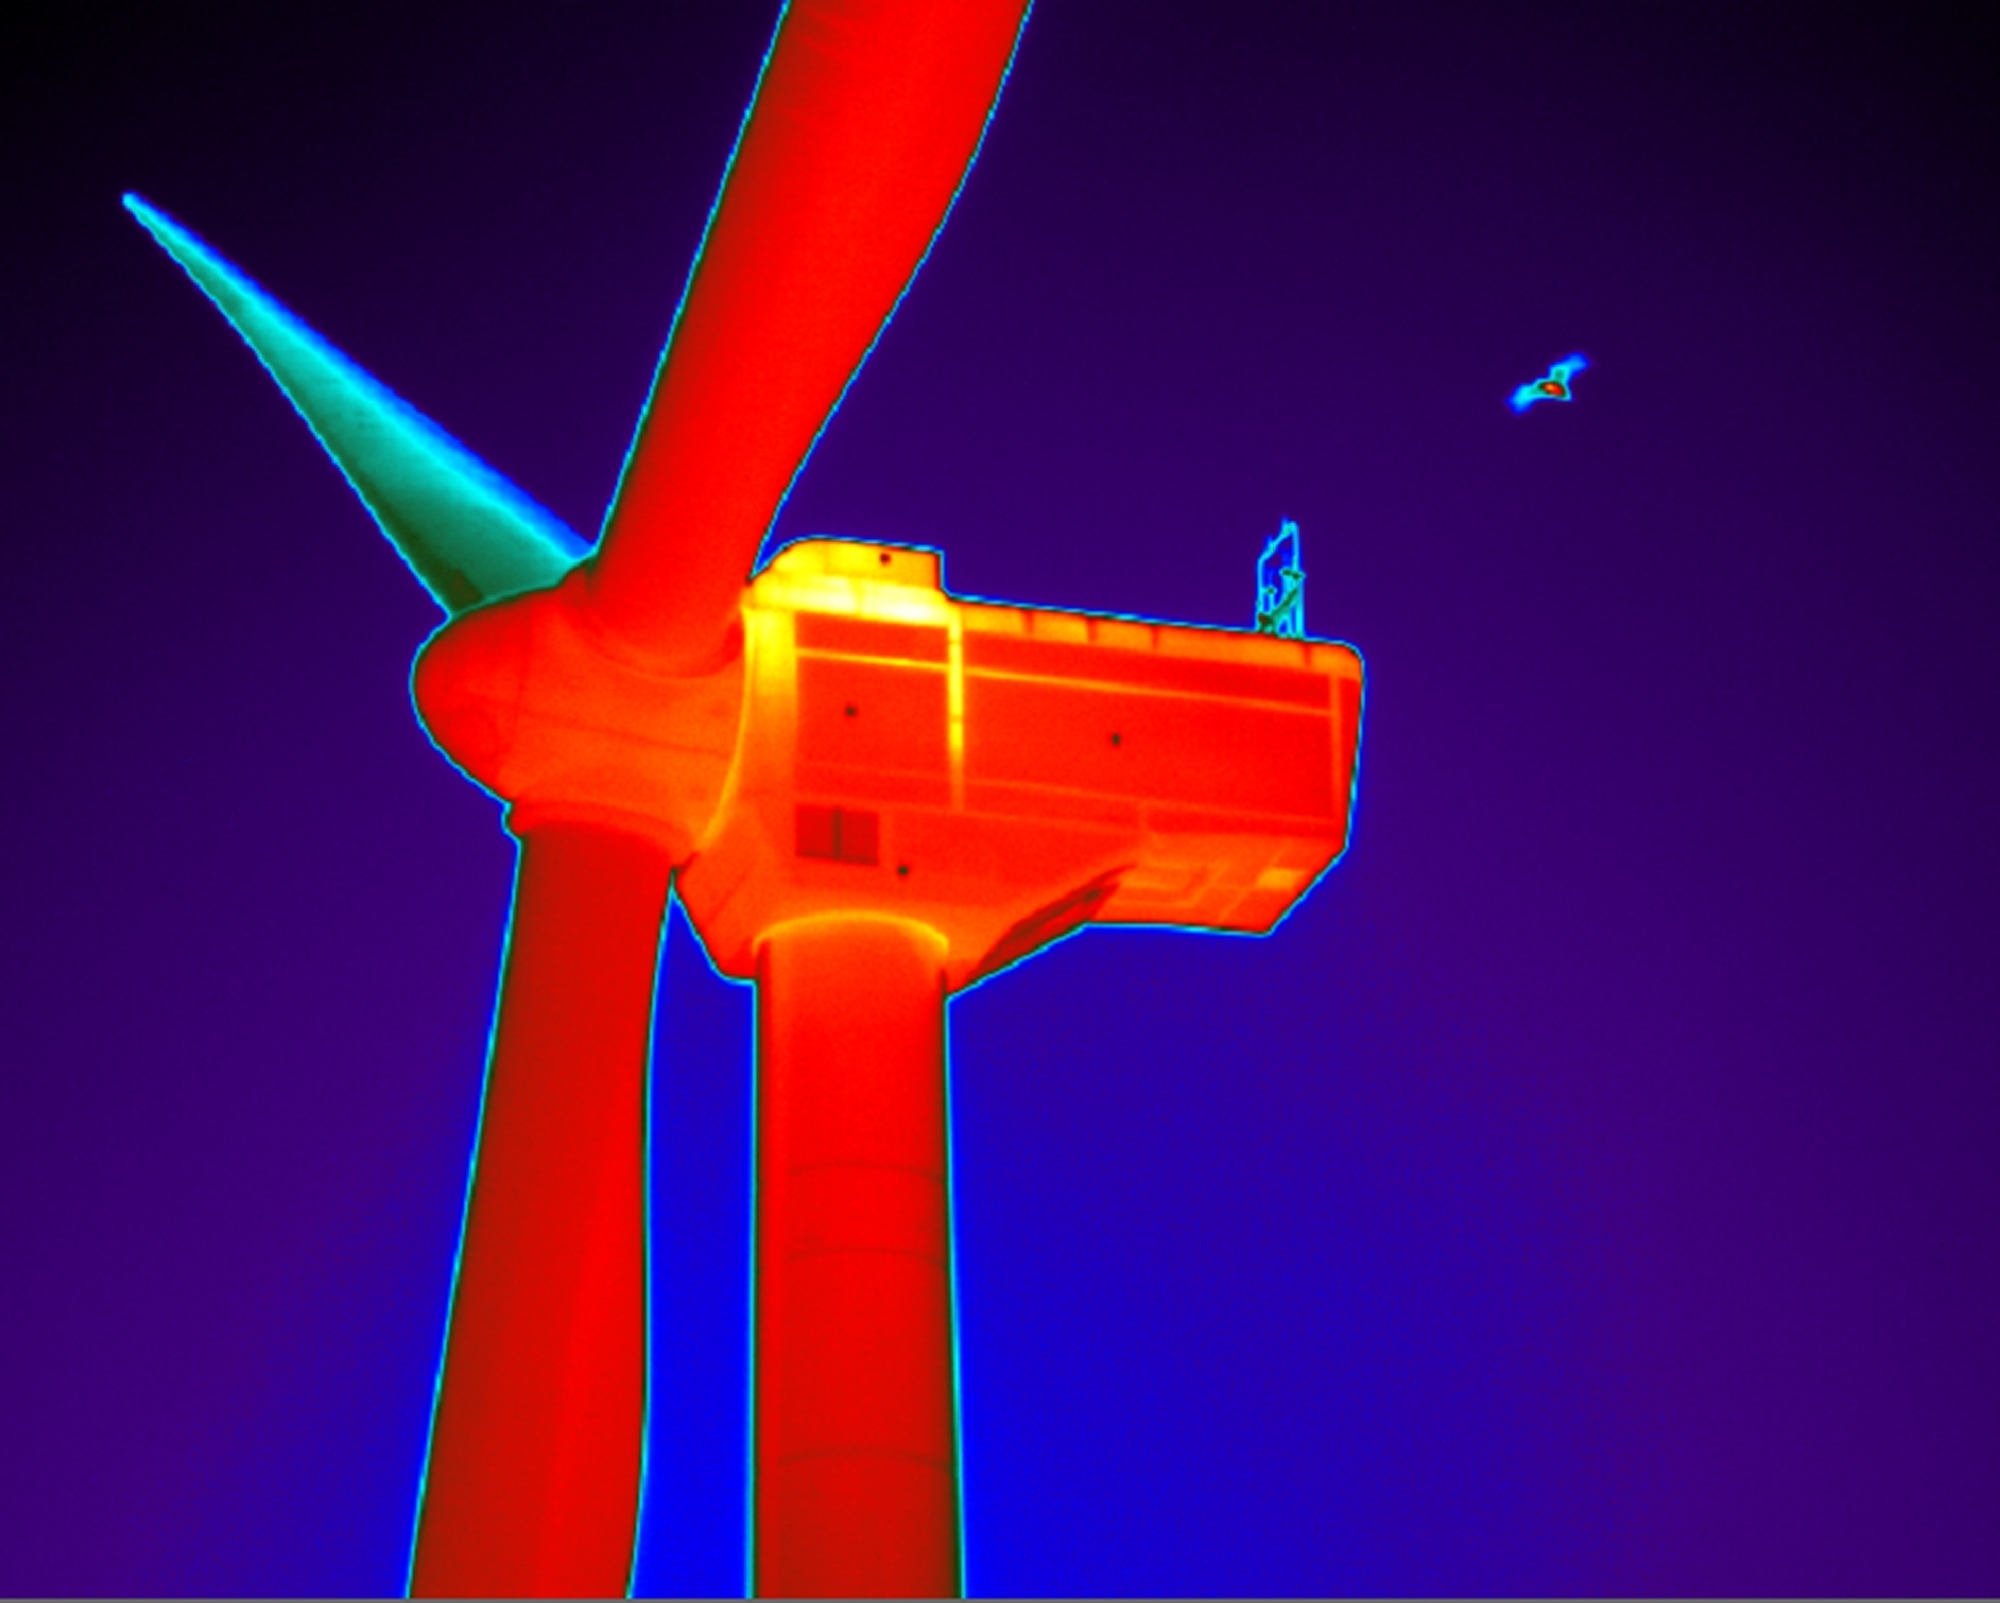 Infrared view of a wind turbine.